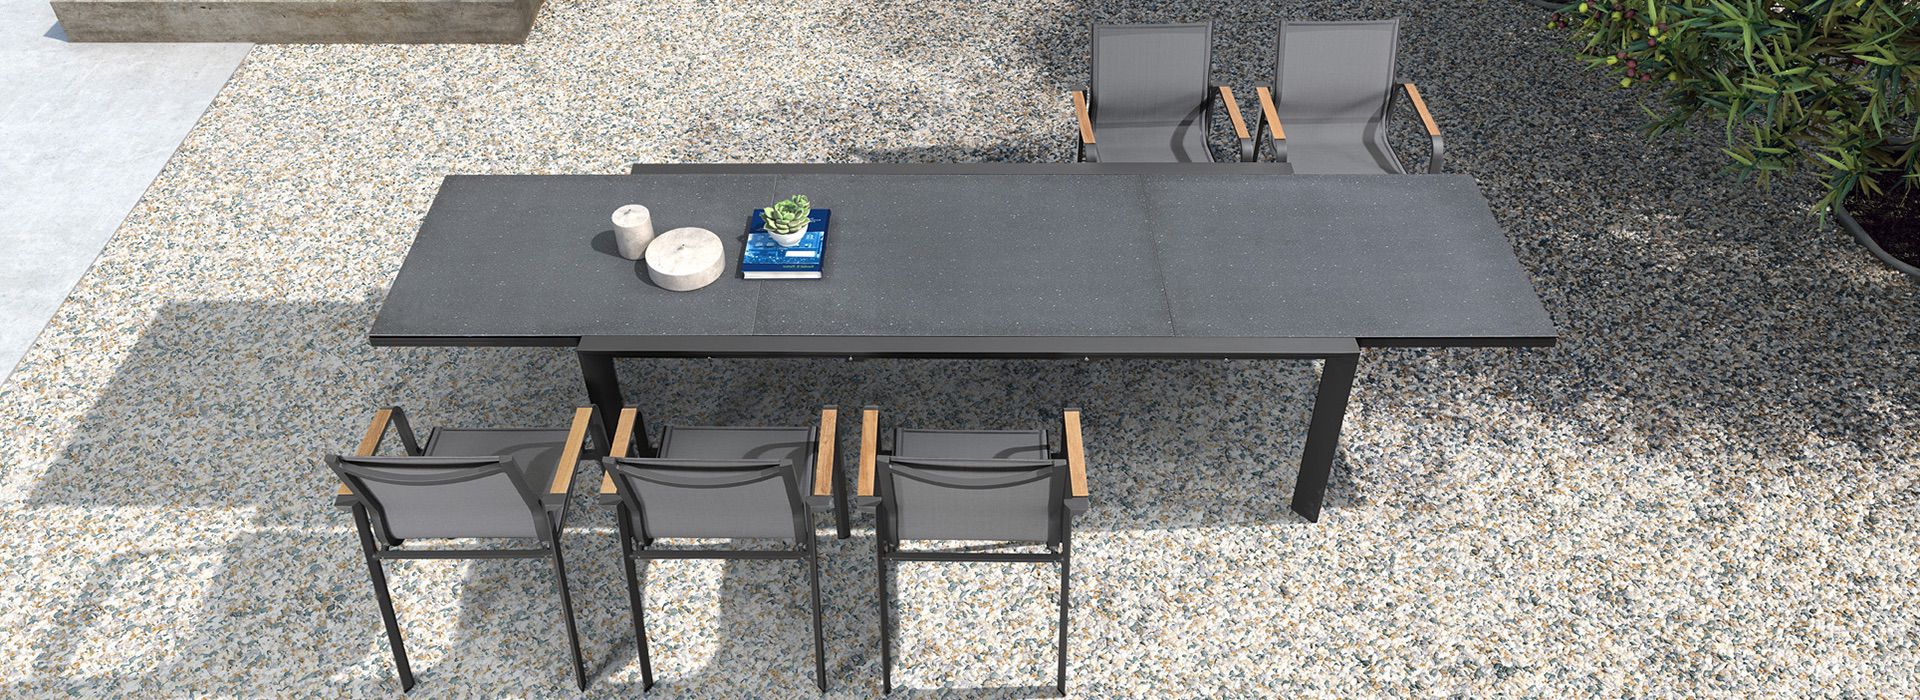 outdoor living table set